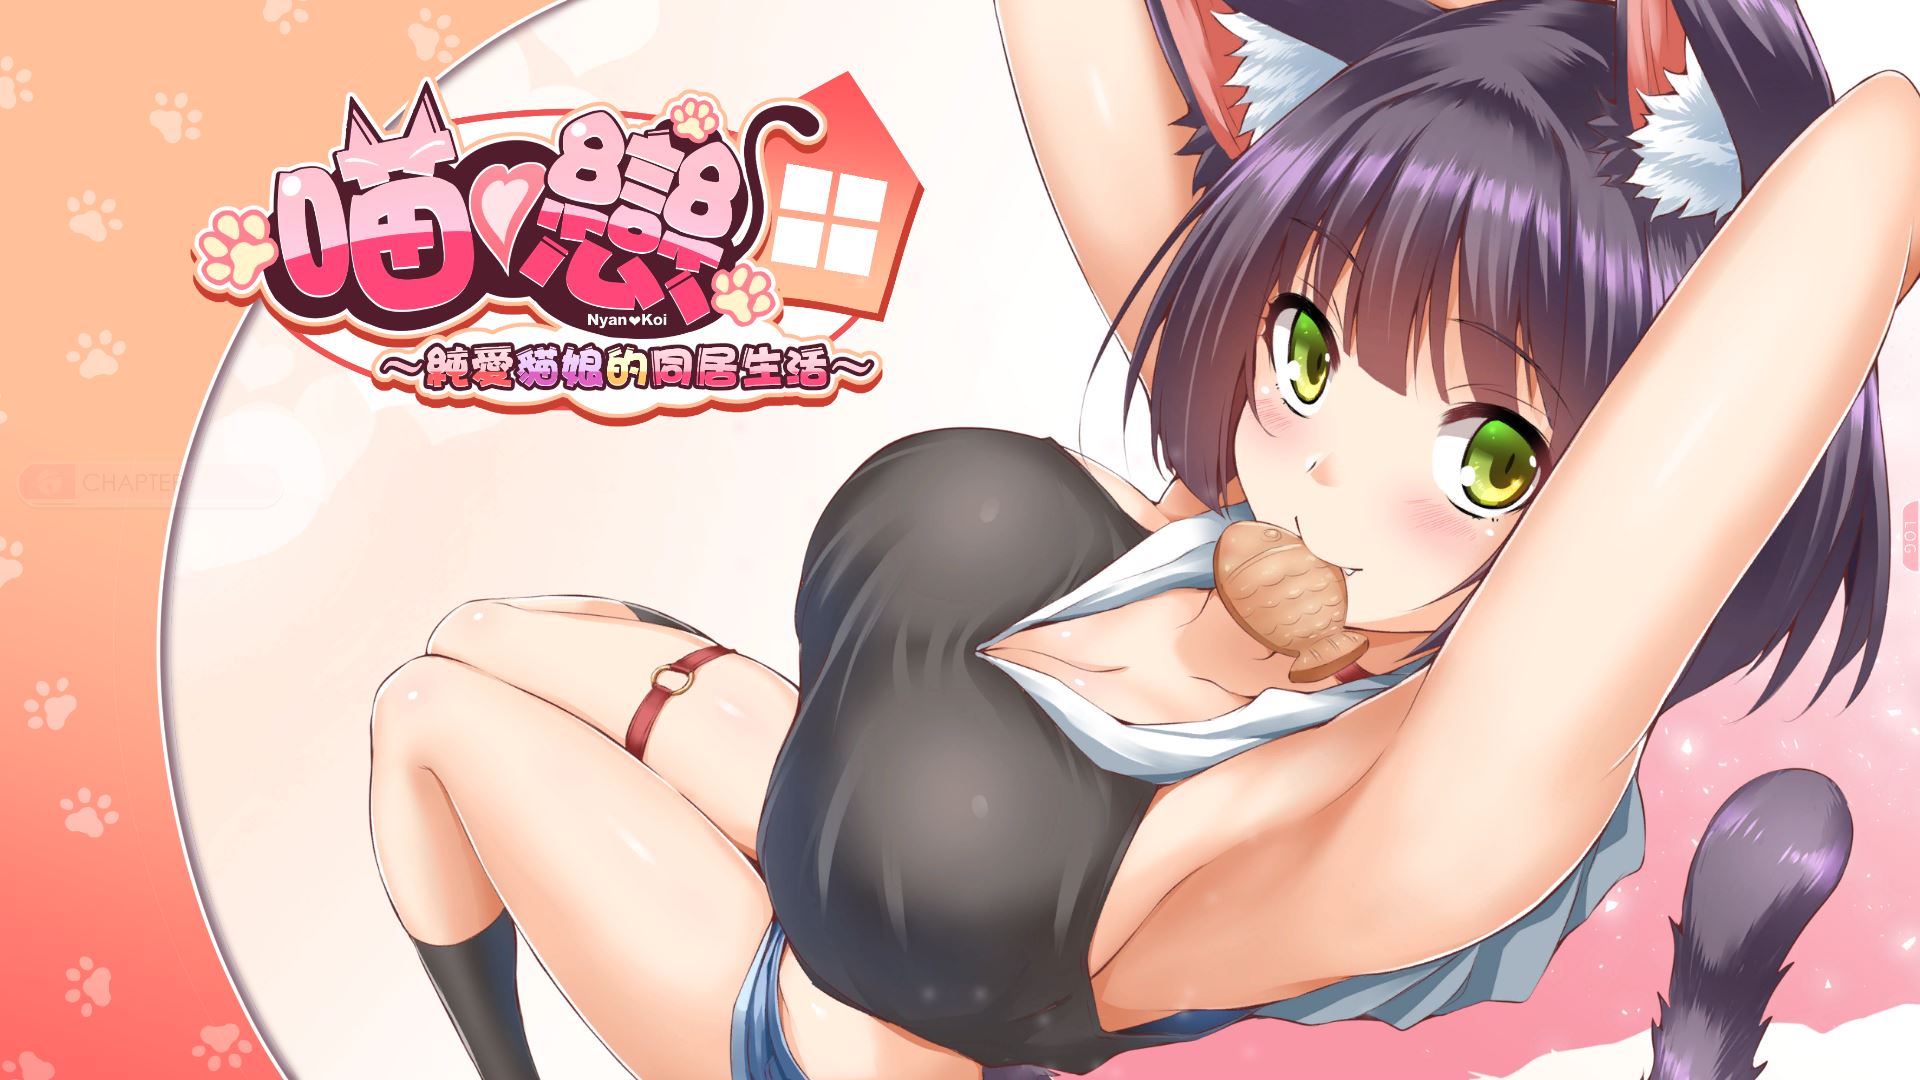 Xxx Hd2000 - Purrrfect Love Unity Porn Sex Game v.Final Download for Windows